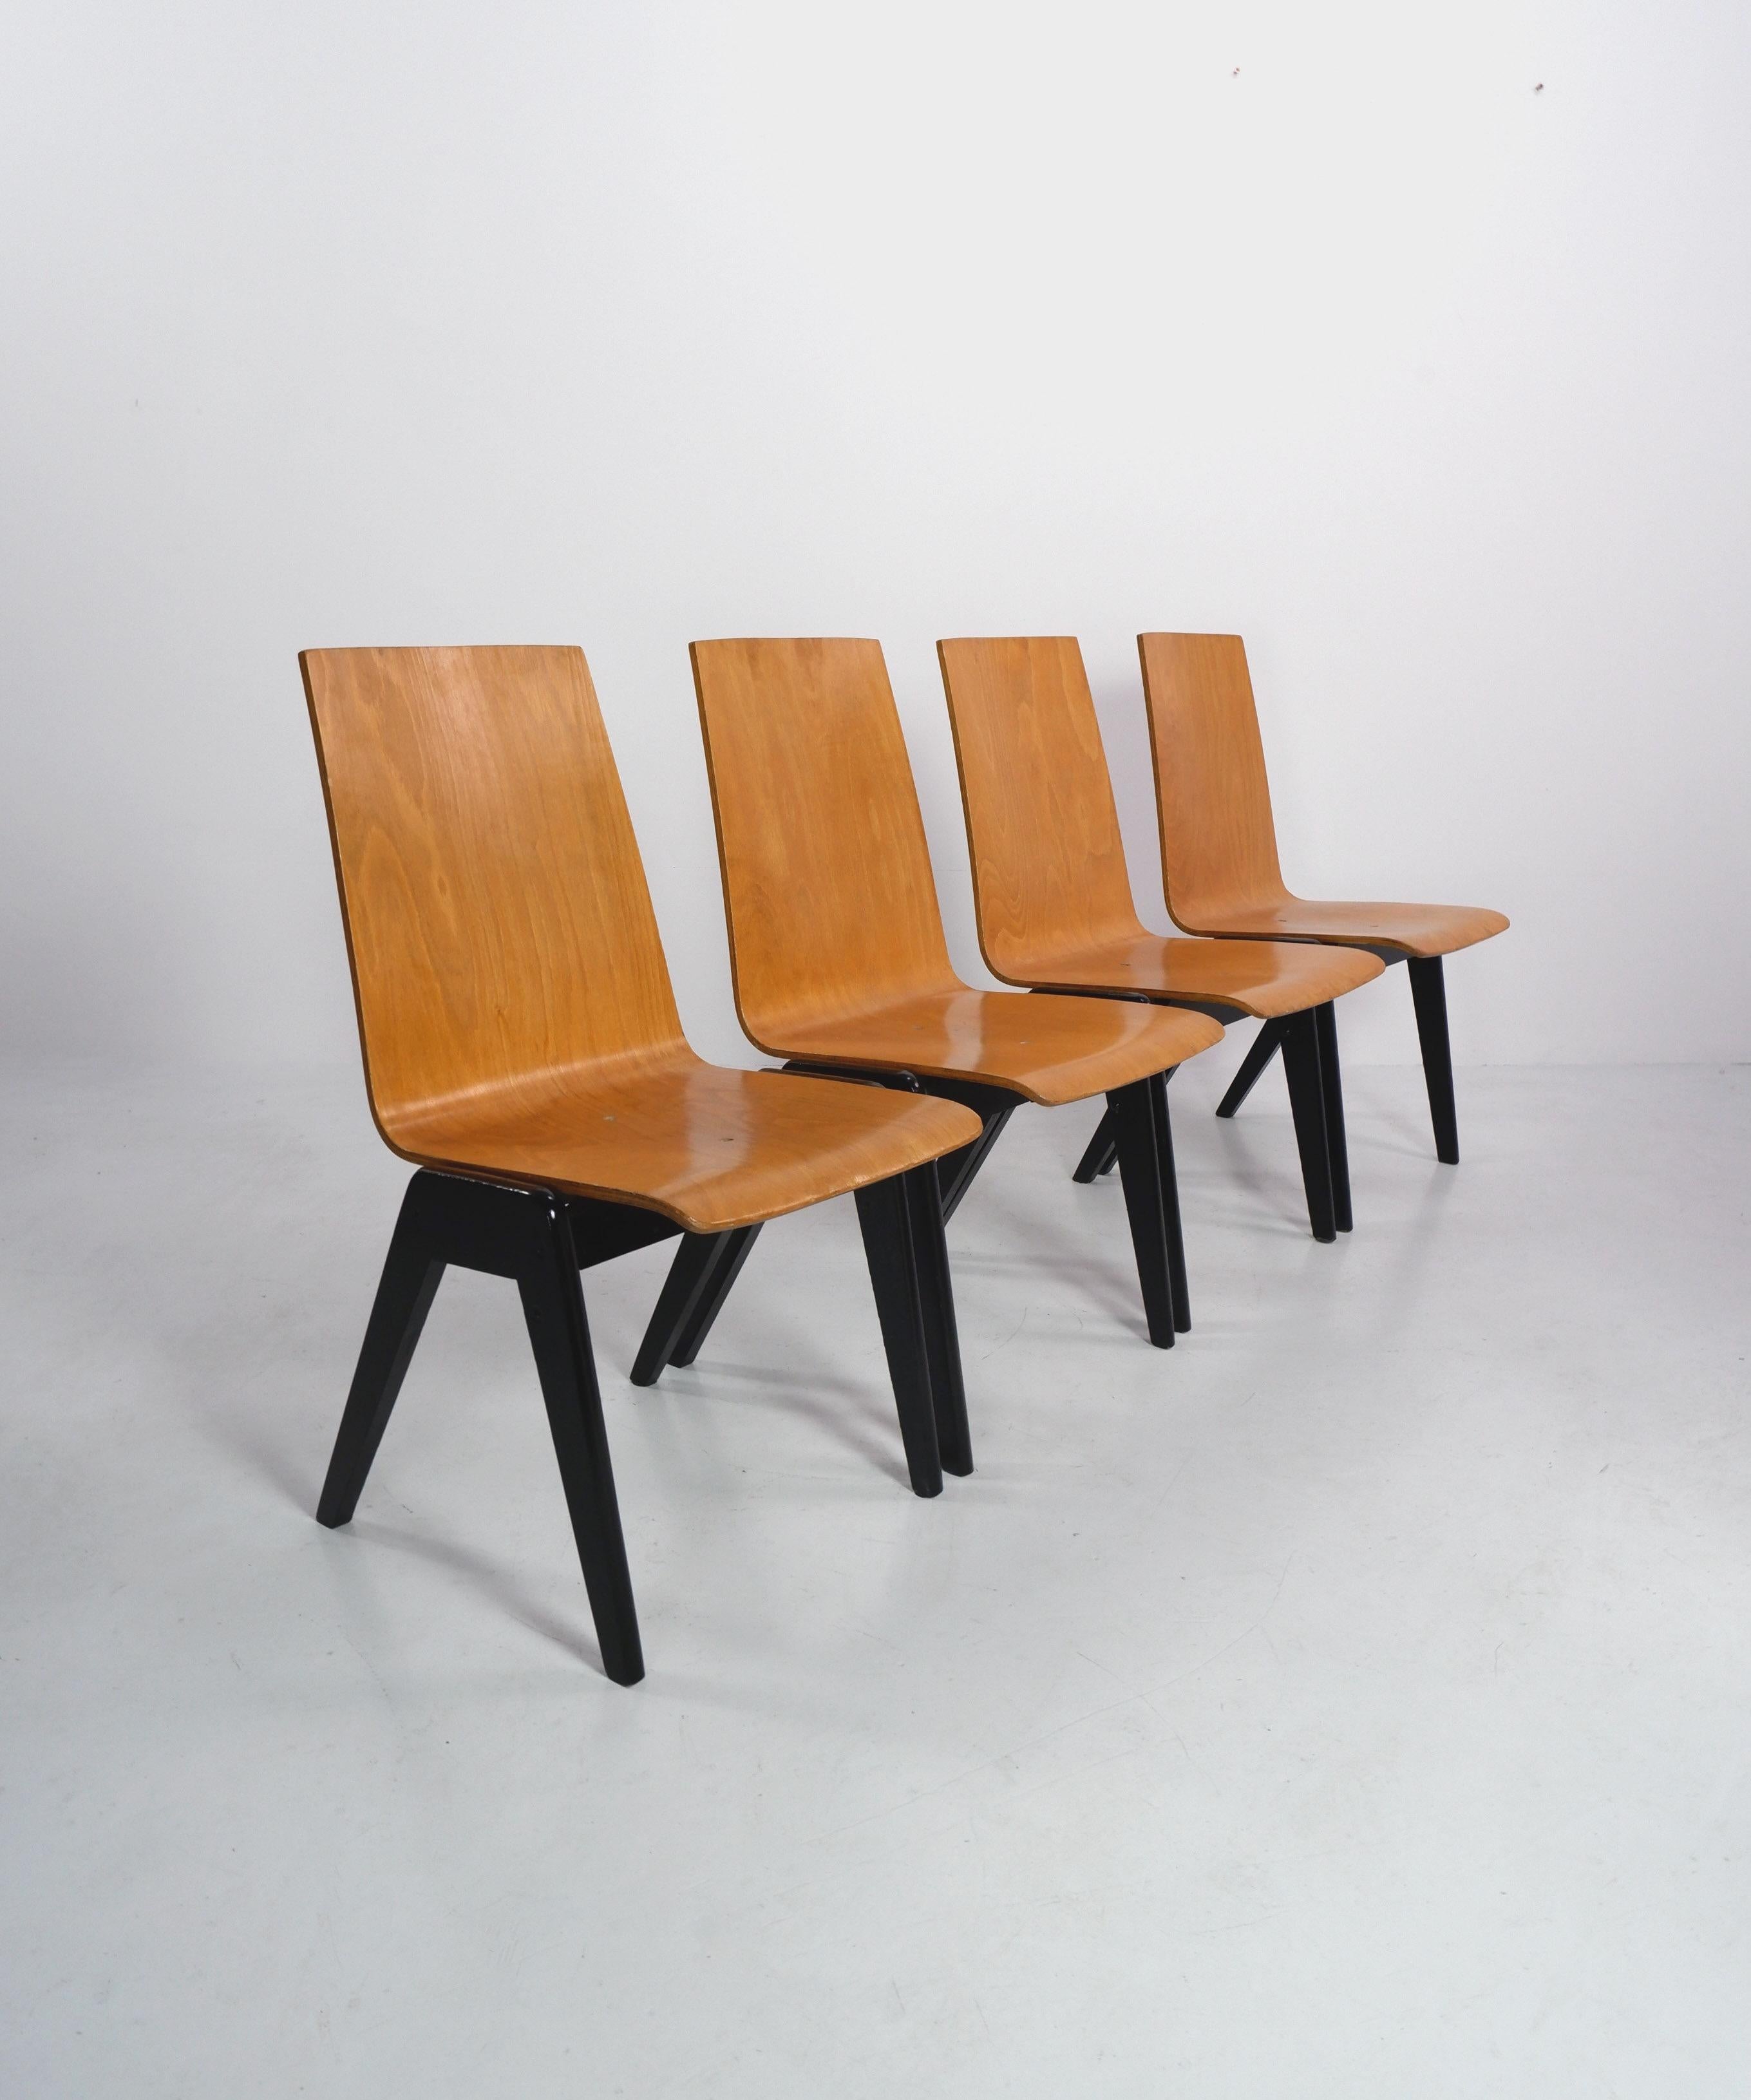 Plywood stacking chairs attributed to Austrian architect Roland Rainer. 

There are 7 chairs available, price is per chair. 

Dimensions (cm, approx): 
Height: 87
Width: 48
Depth: 55.